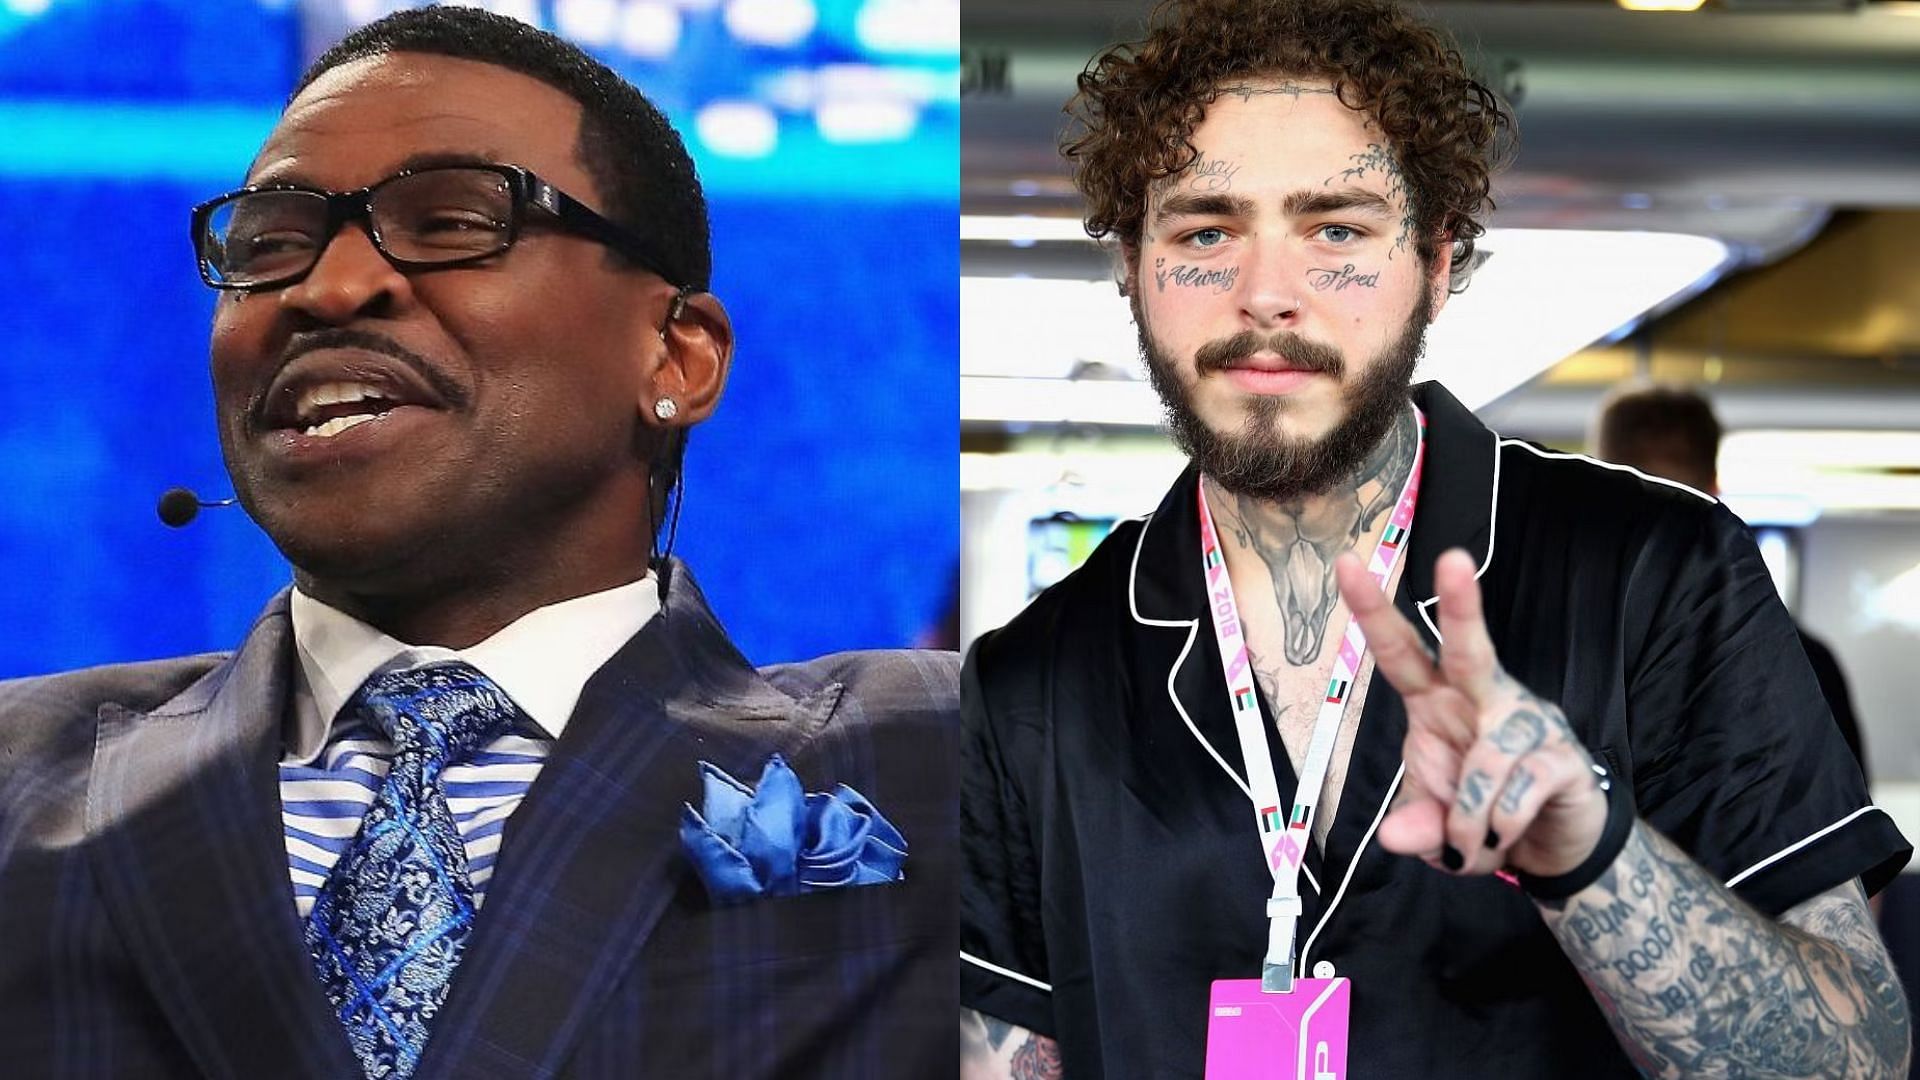 Dallas Cowboys sent former wide receiver Michael Irvin an image wherein Post Malone was wearing the number 88 jersey.